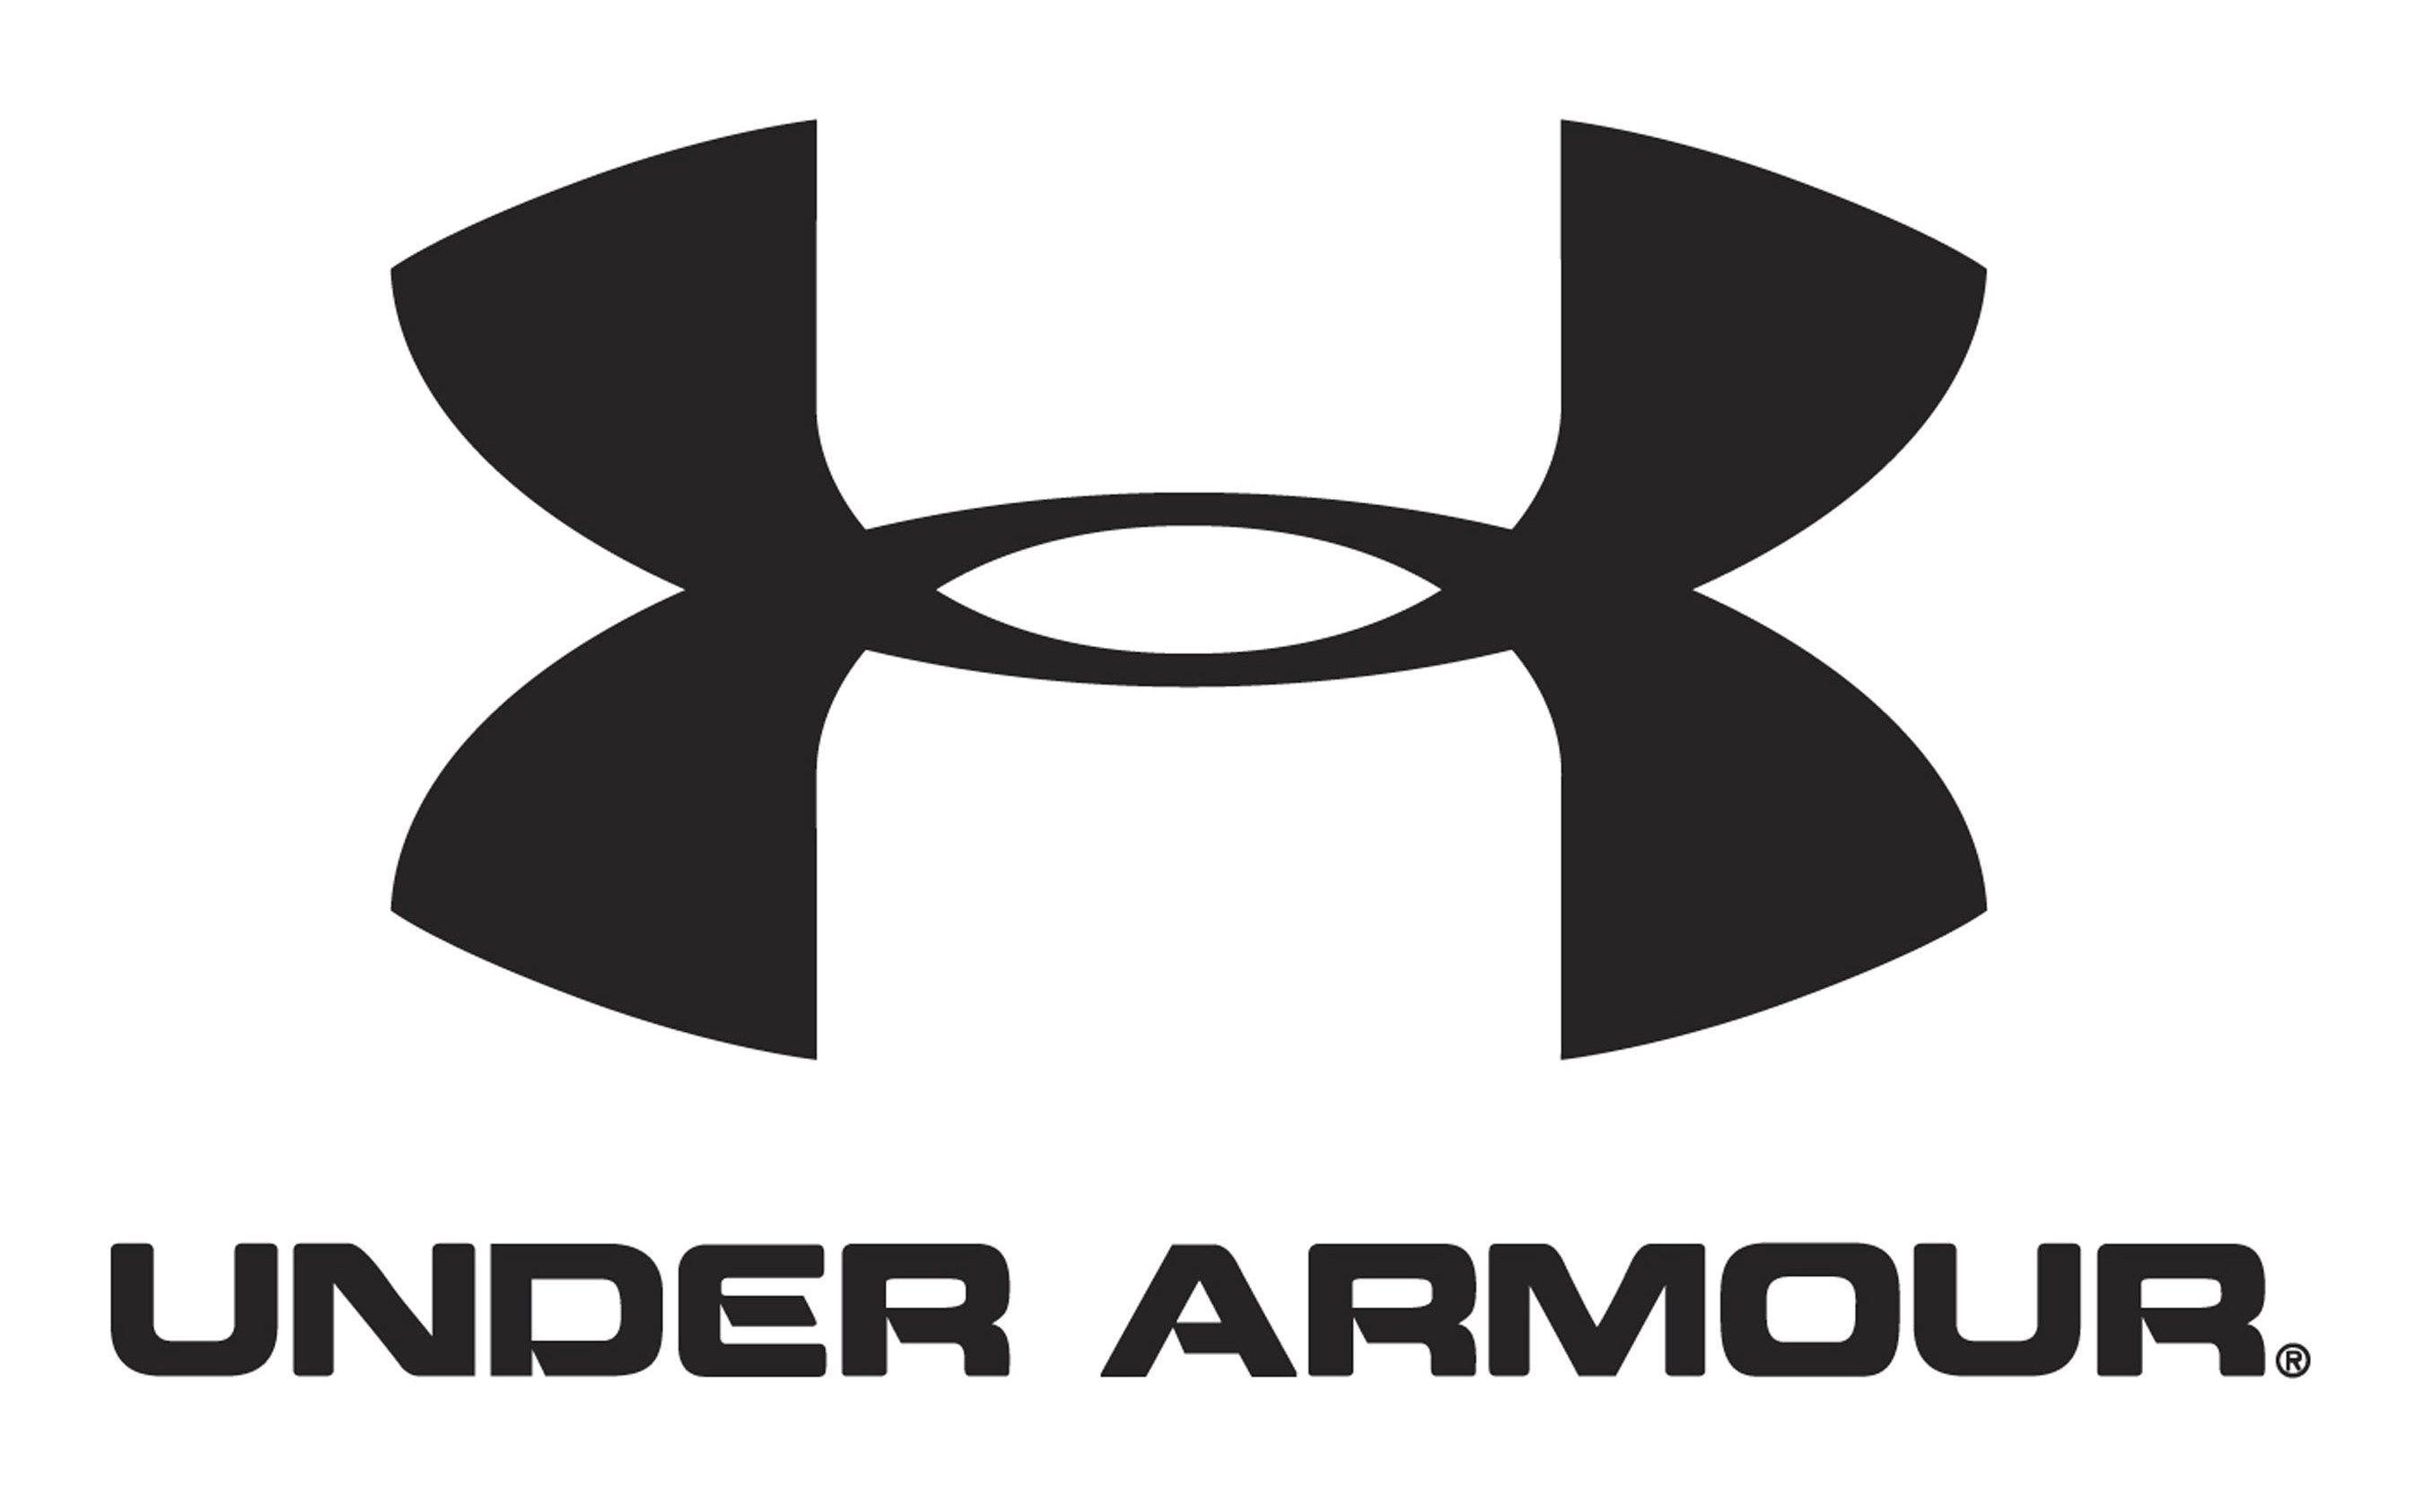 Red and Blue Under Armour Logo - under armour logo cheap > OFF48% The Largest Catalog Discounts